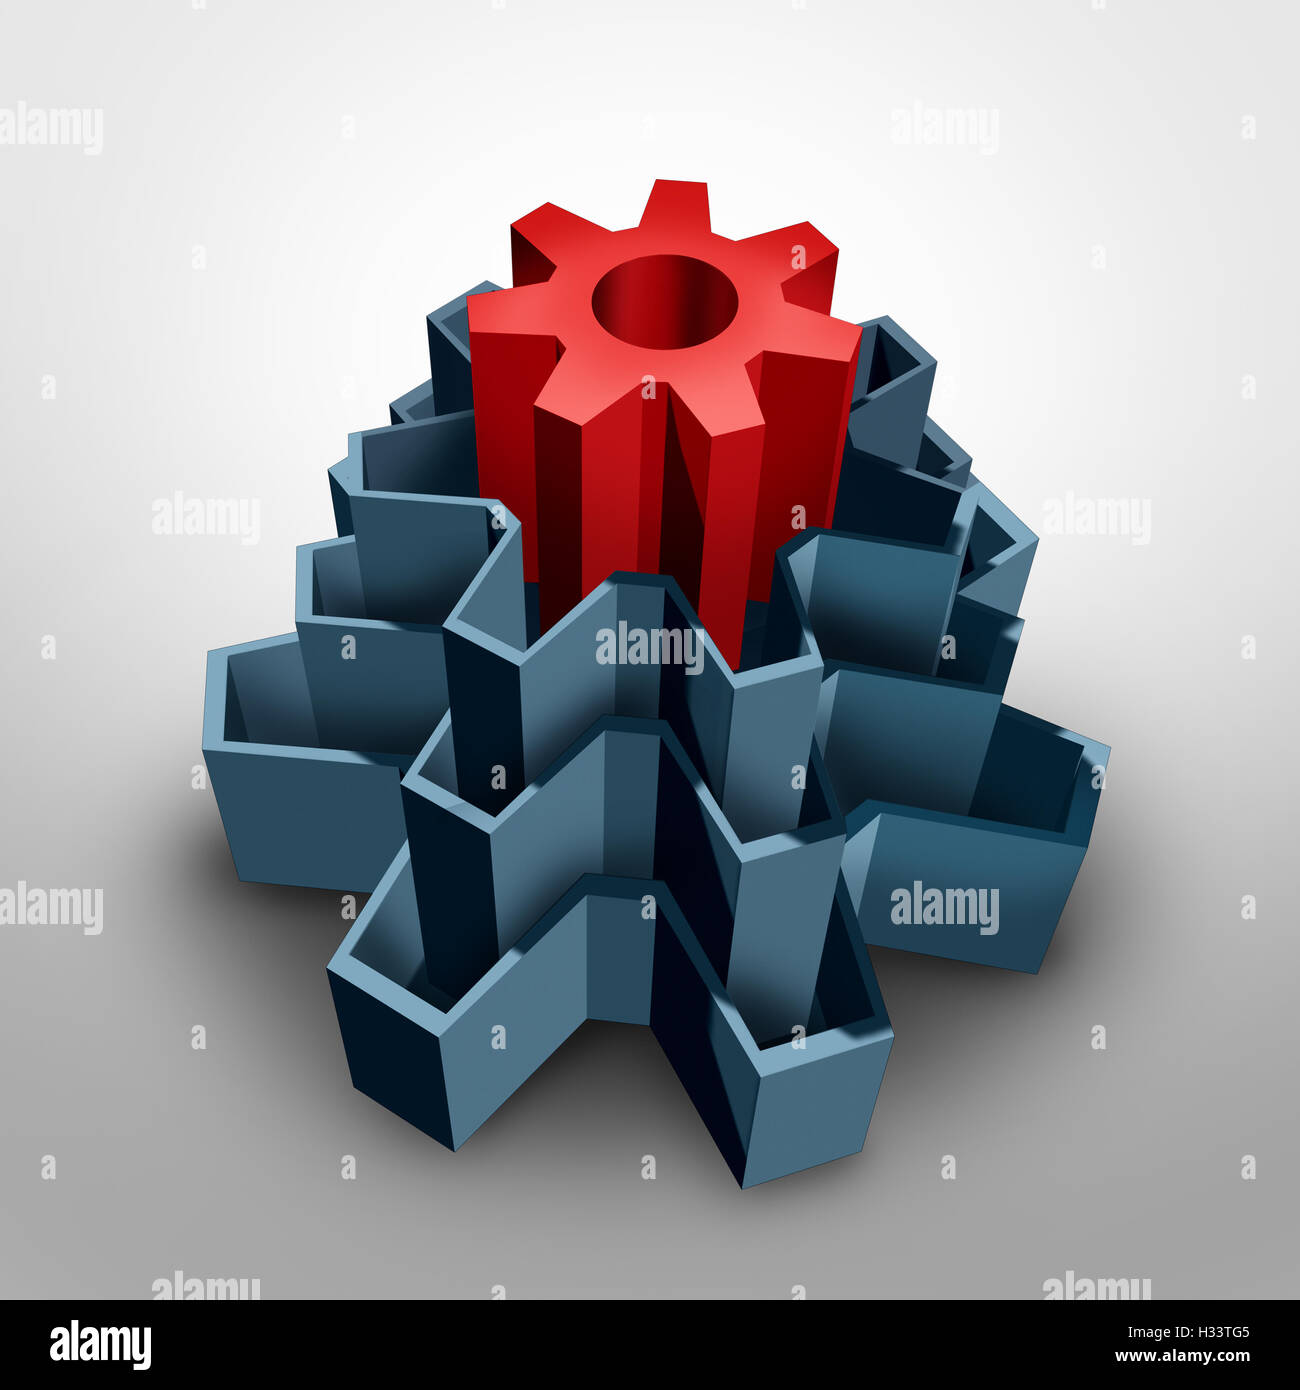 Core business solution concept as an inner center red gear inside a group of larger cog shapes as a corporate foundation symbol Stock Photo